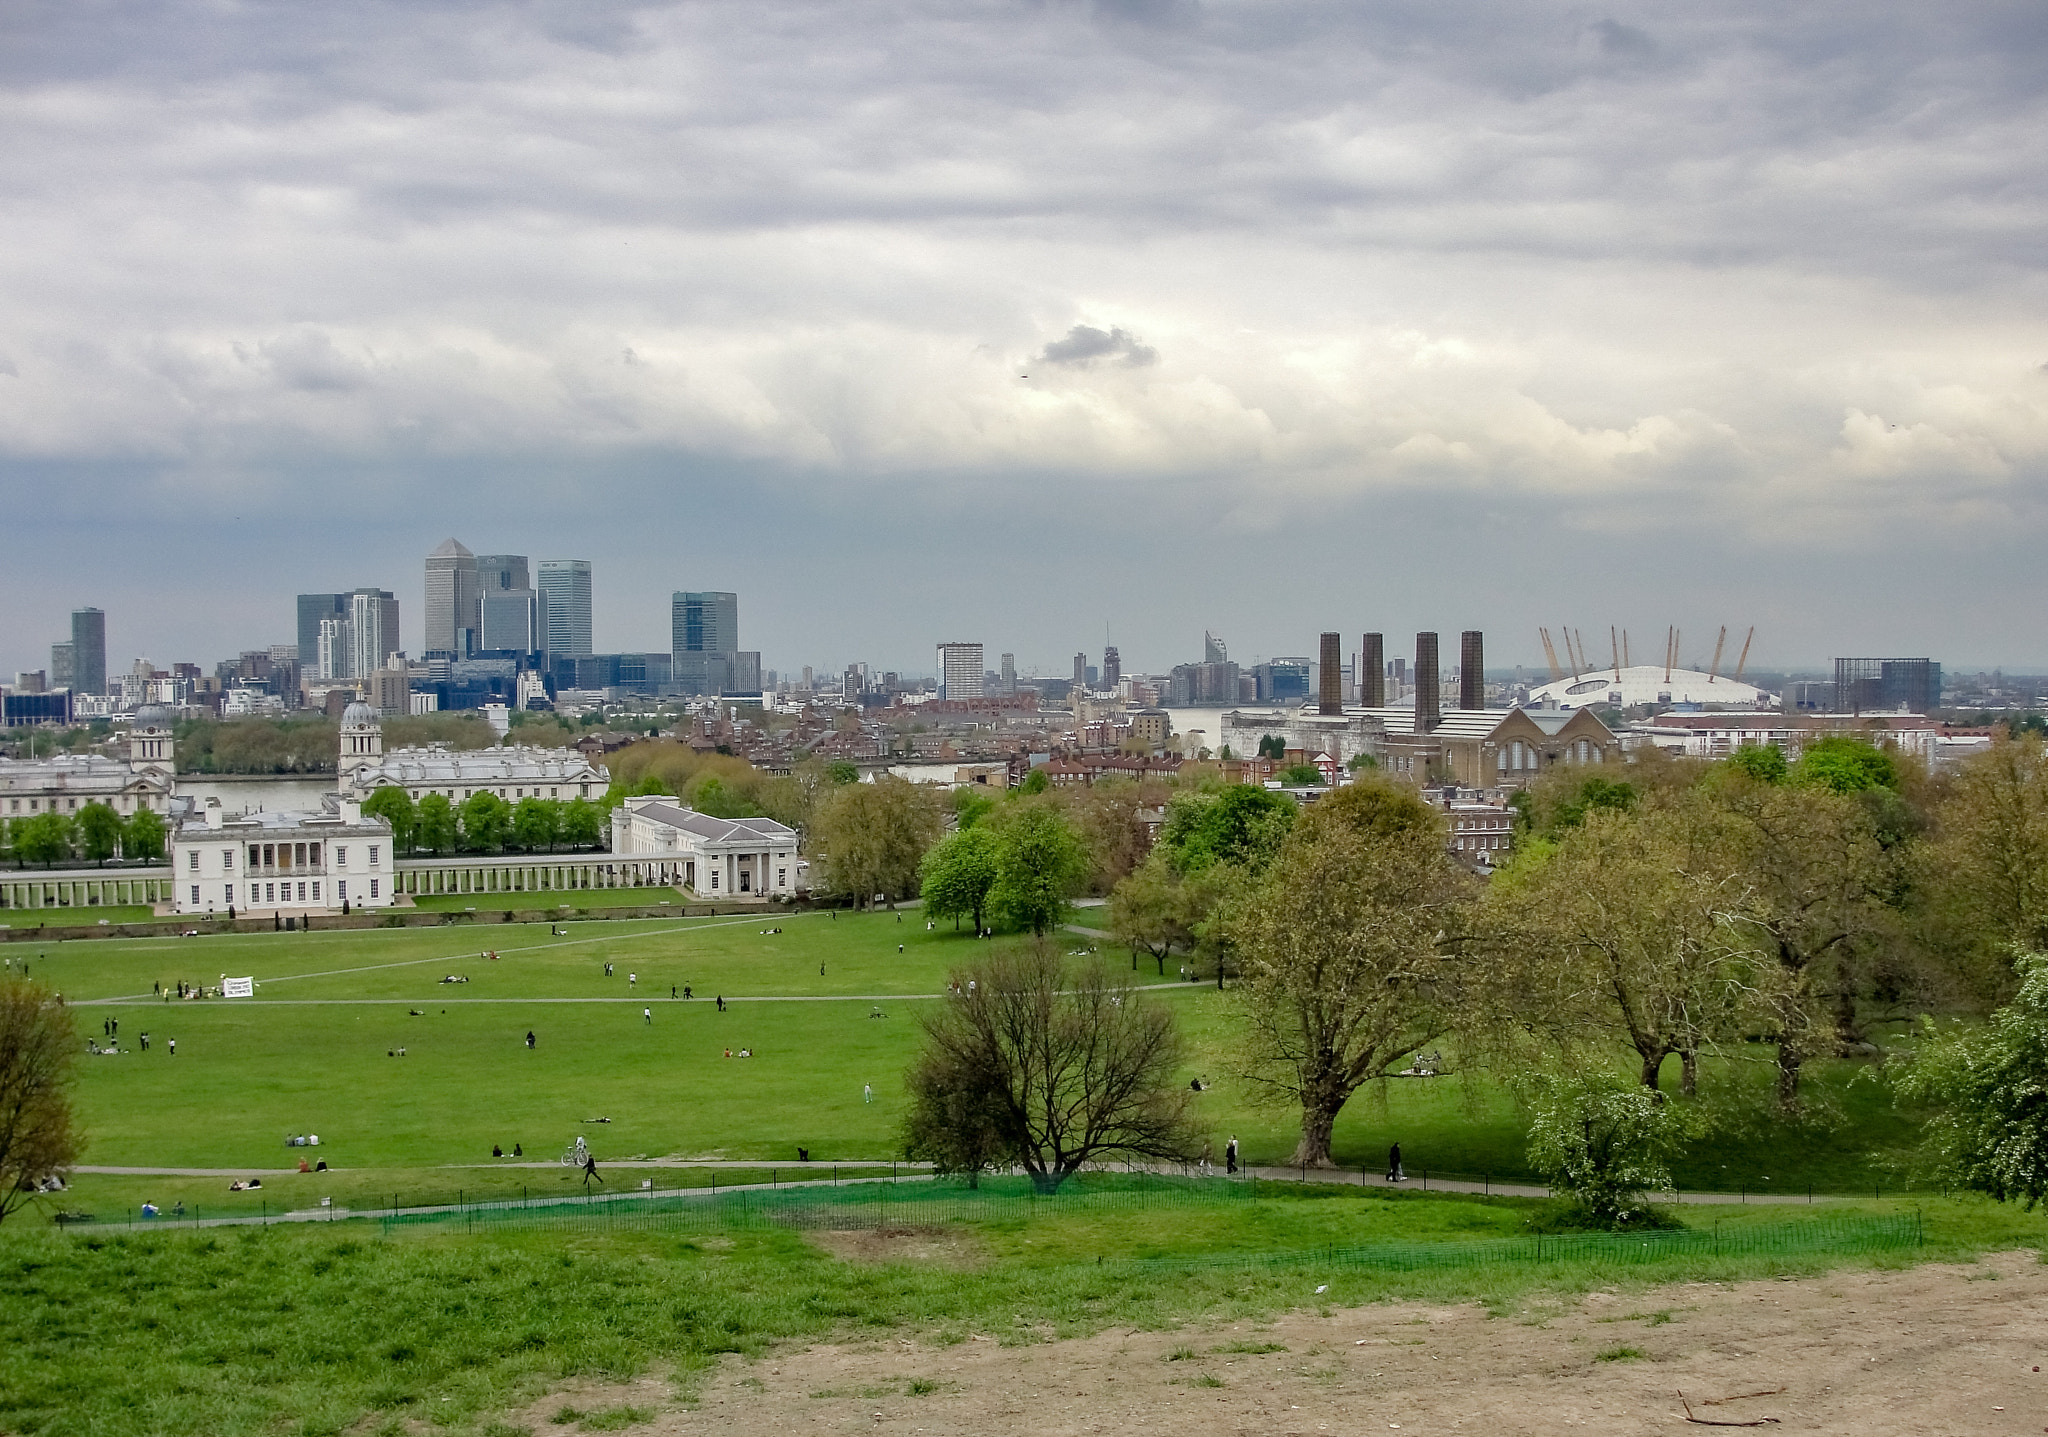 Sony Cyber-shot DSC-H20 sample photo. City of london from greenwich hill, london 3 photography